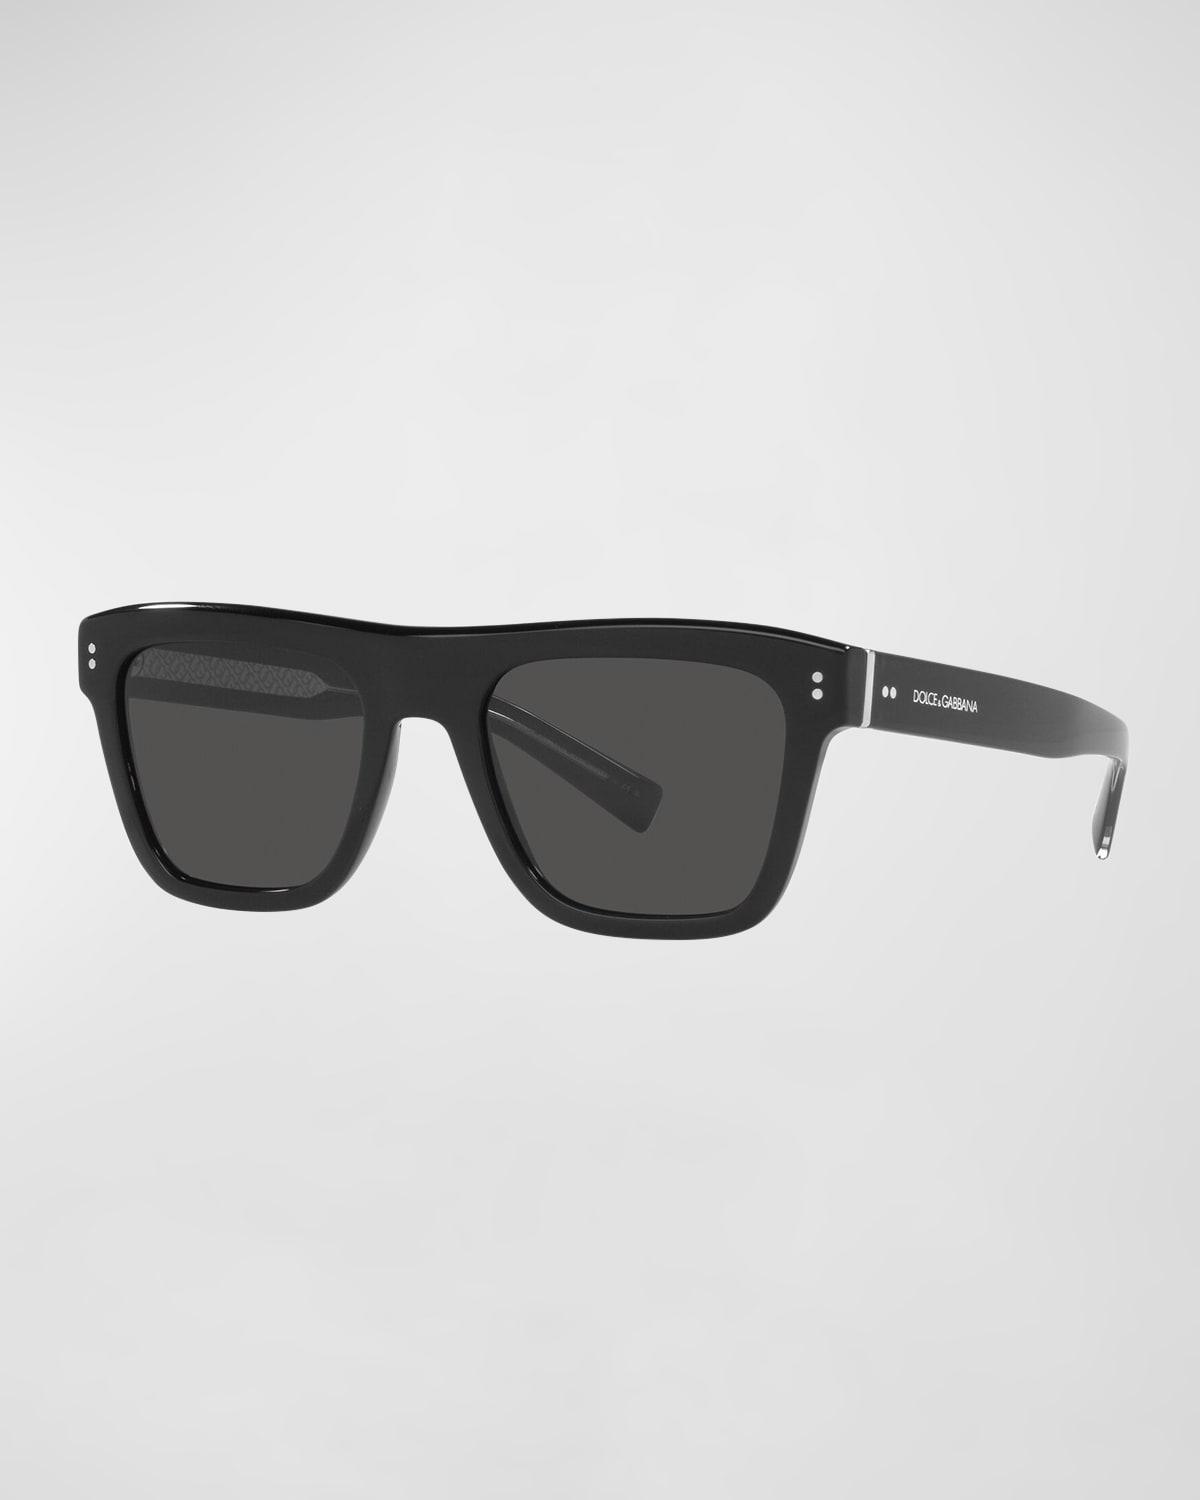 burberry 38mm Shield Sunglasses Product Image